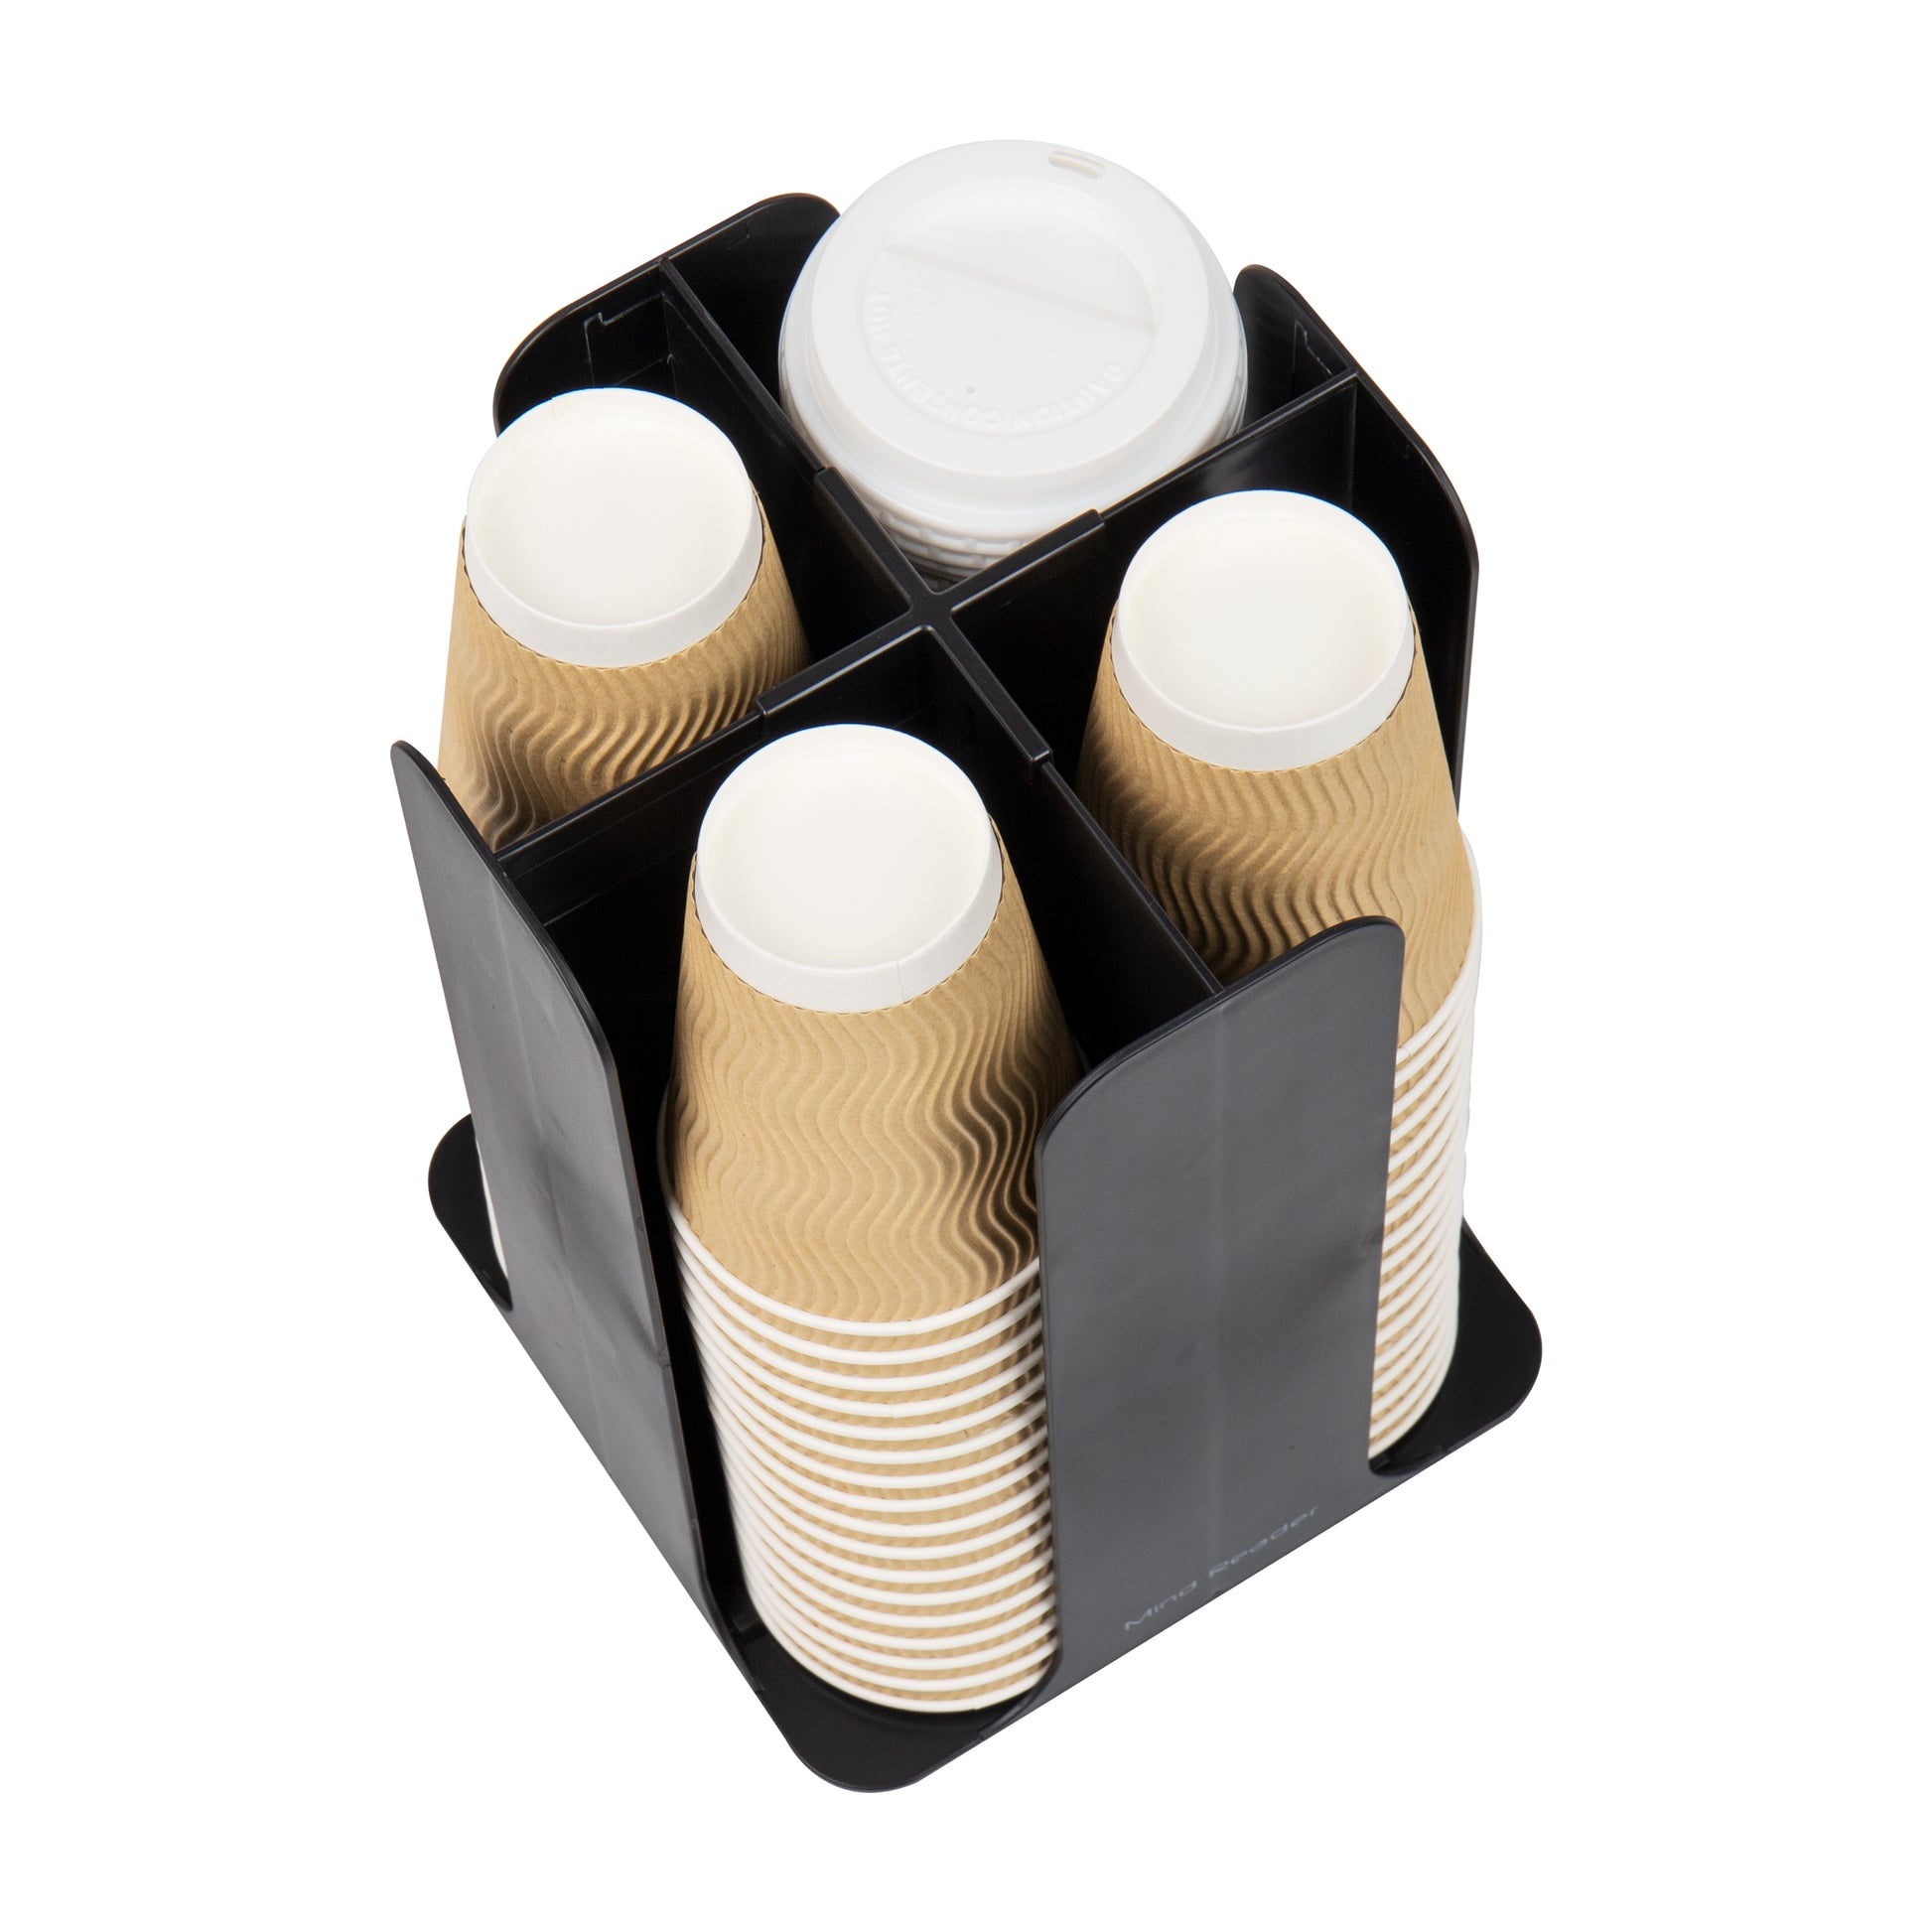 Cup and Lid Carousel Holder - Mindspace